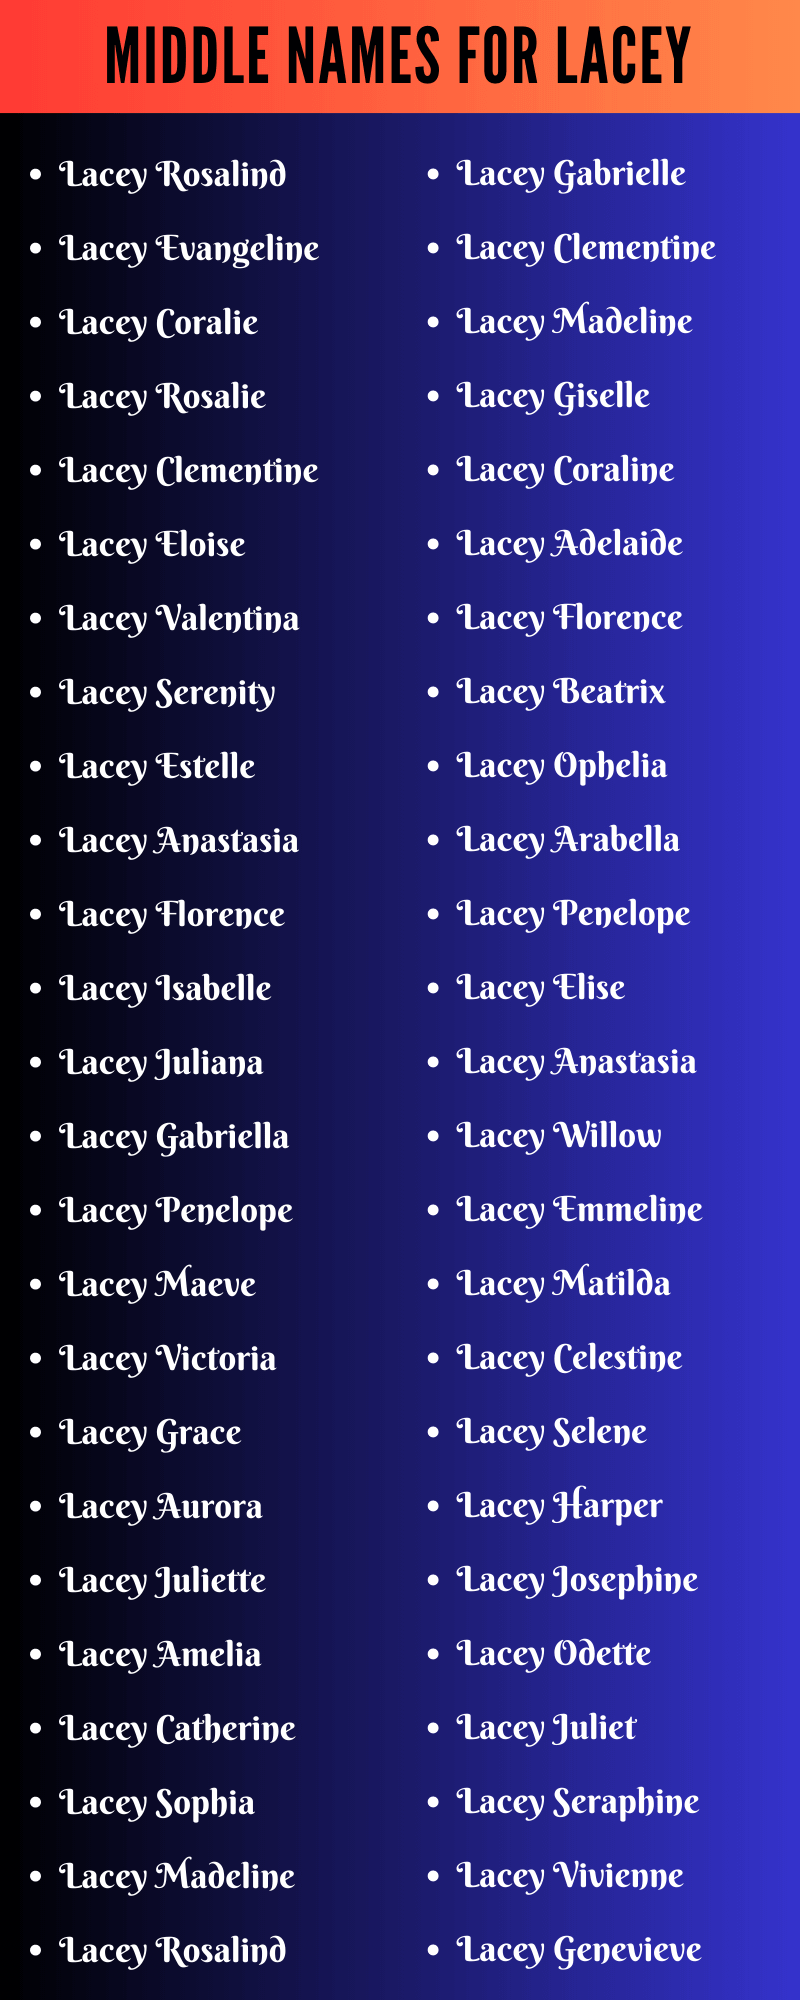 Middle Names For Lacey